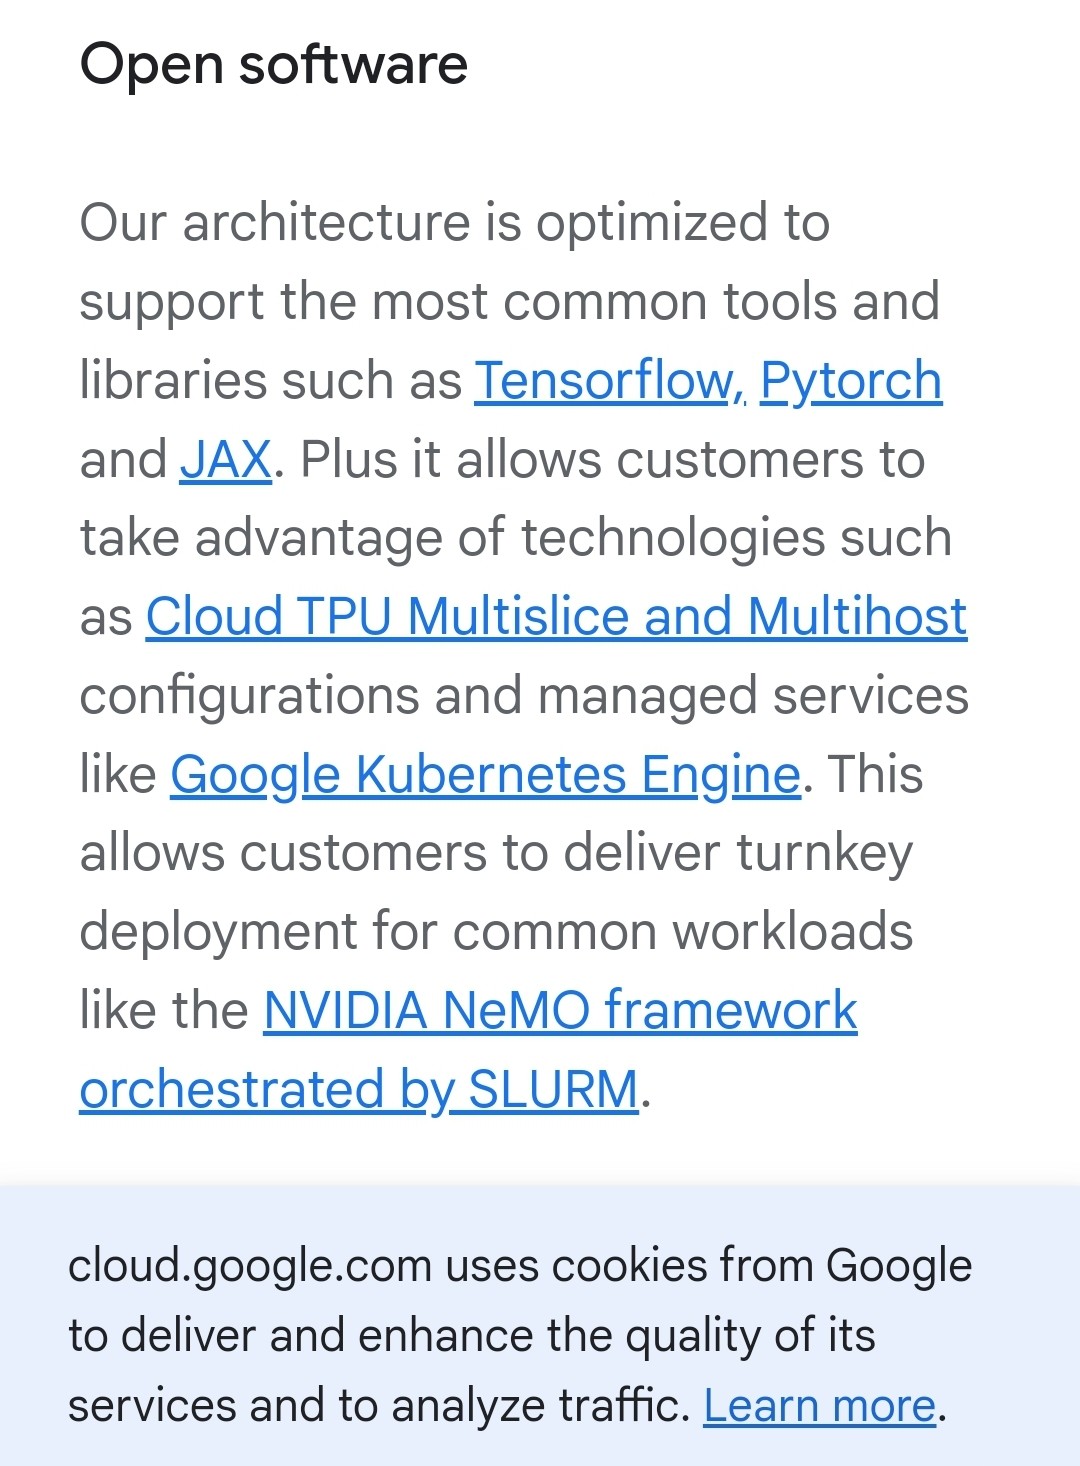 Google Cloud examples of "Open Software"